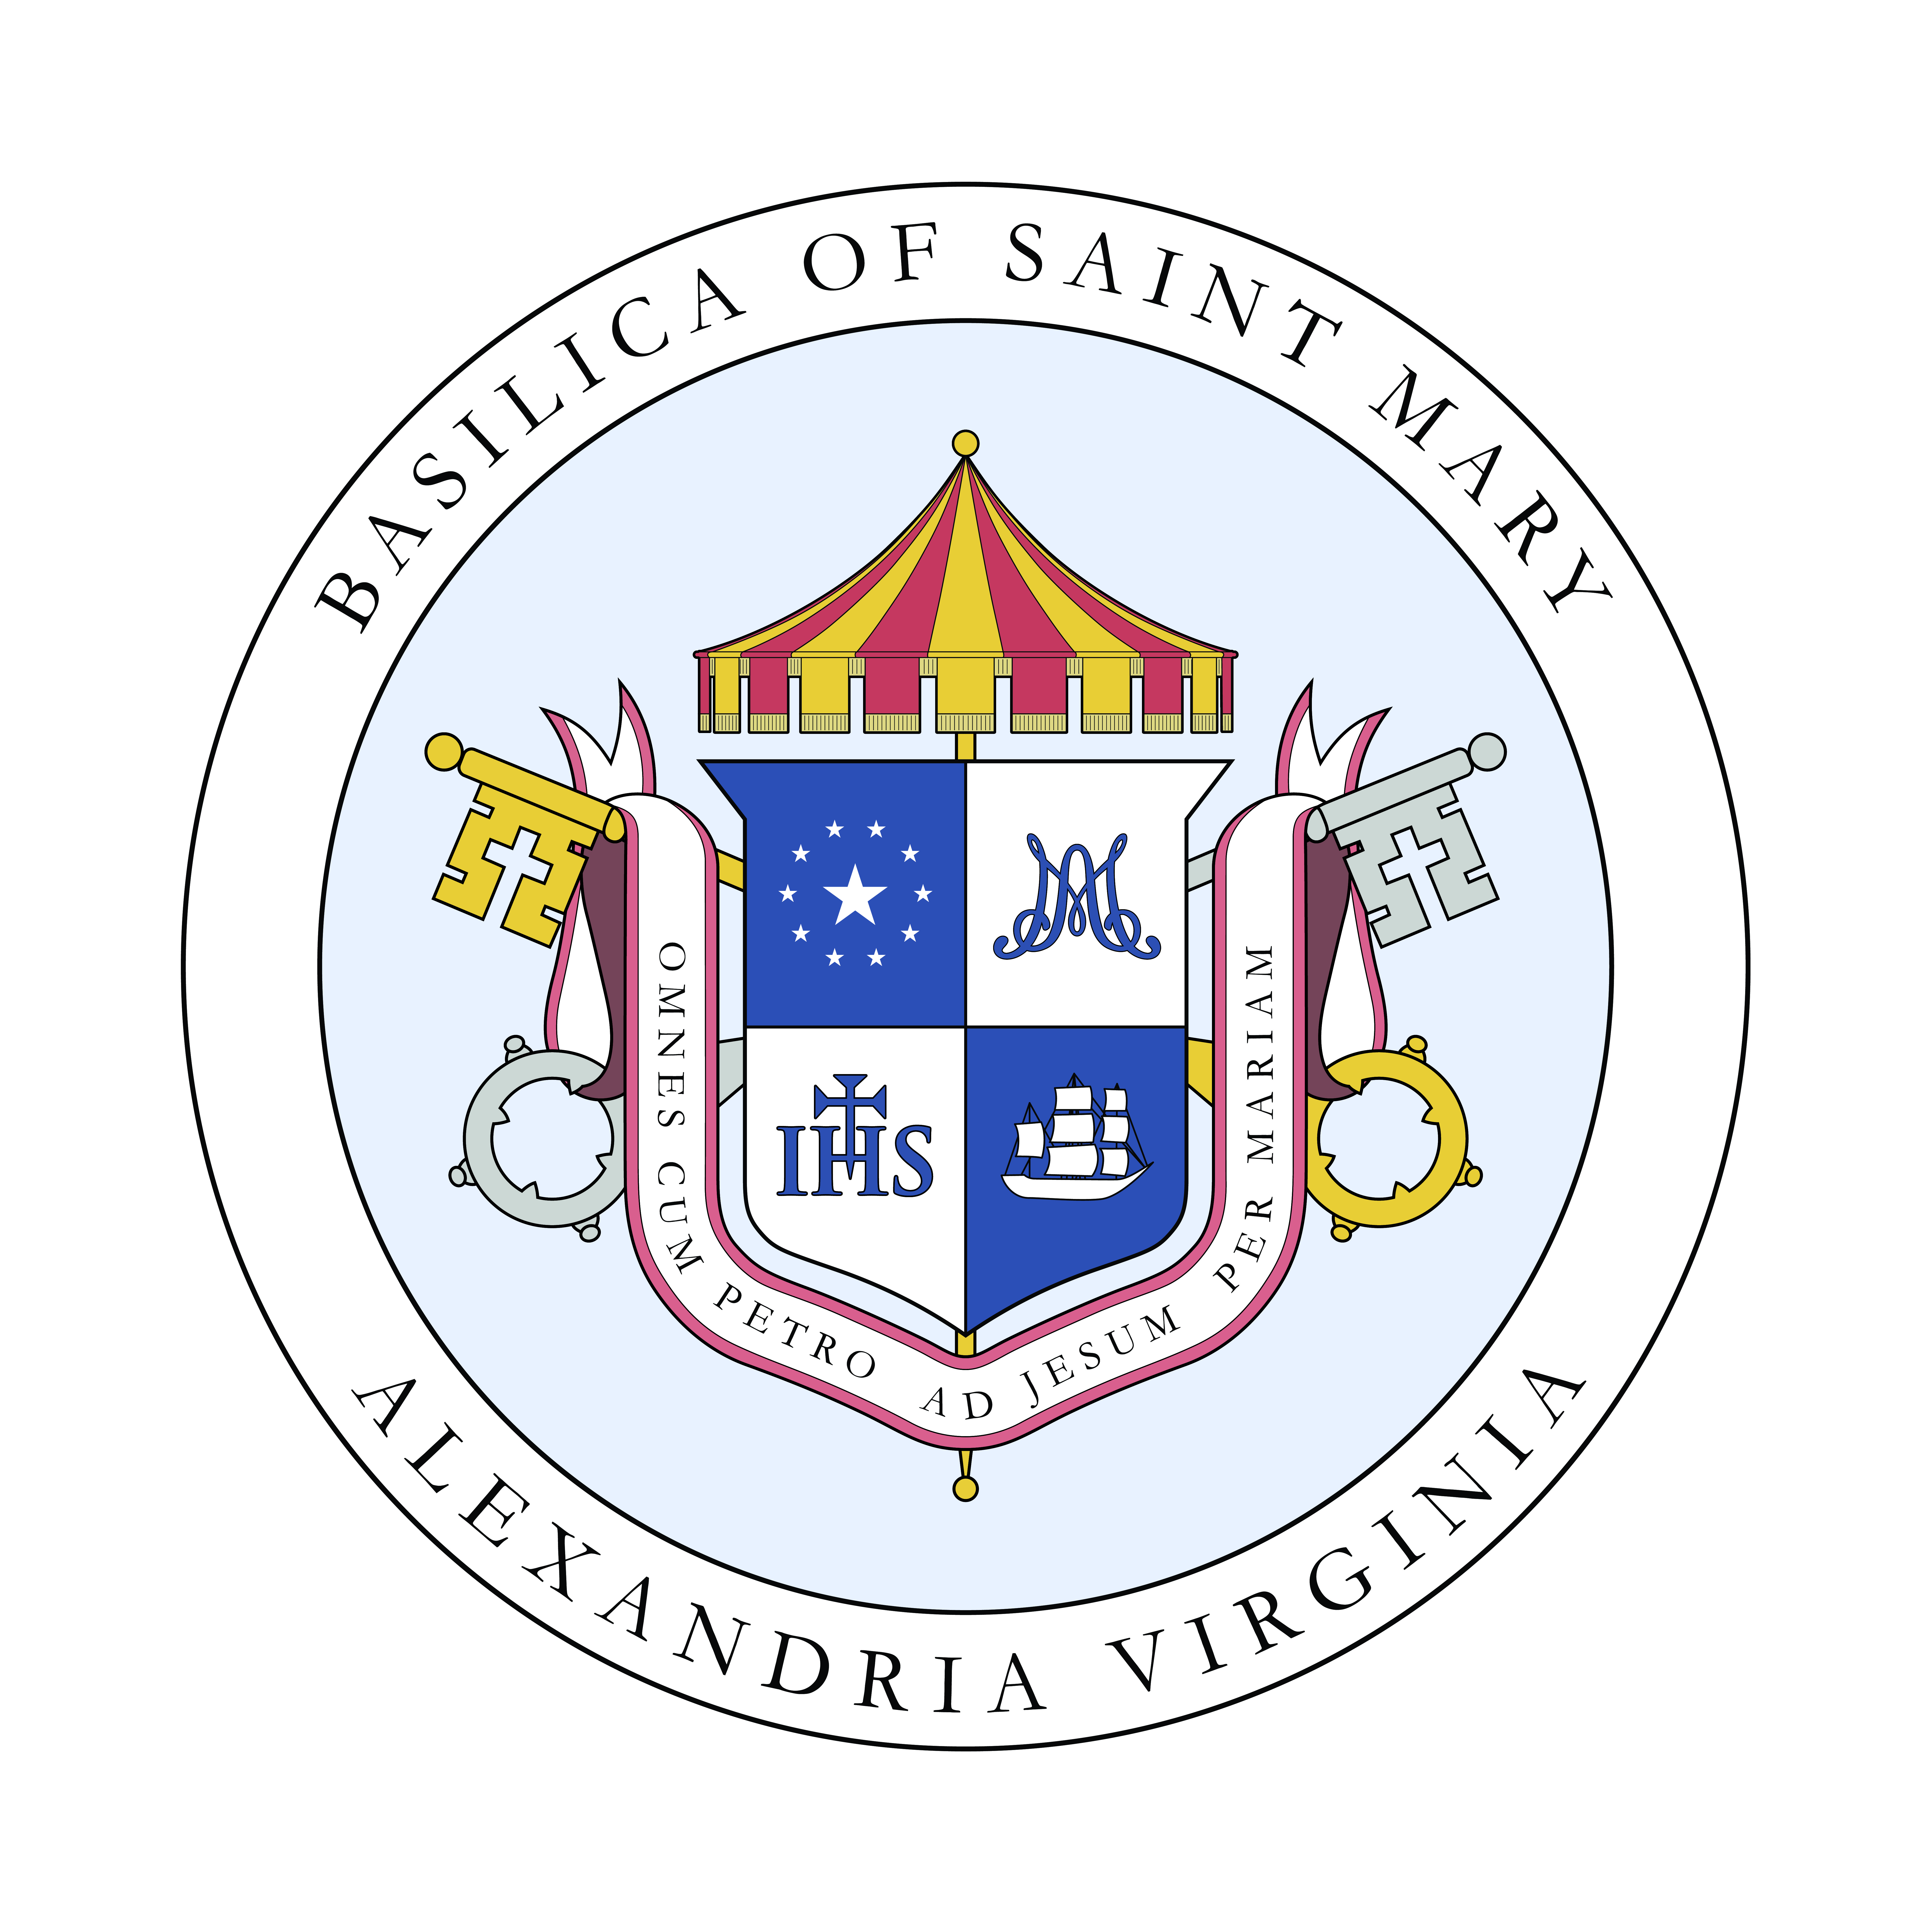 Basilica of St. Mary seal with text border